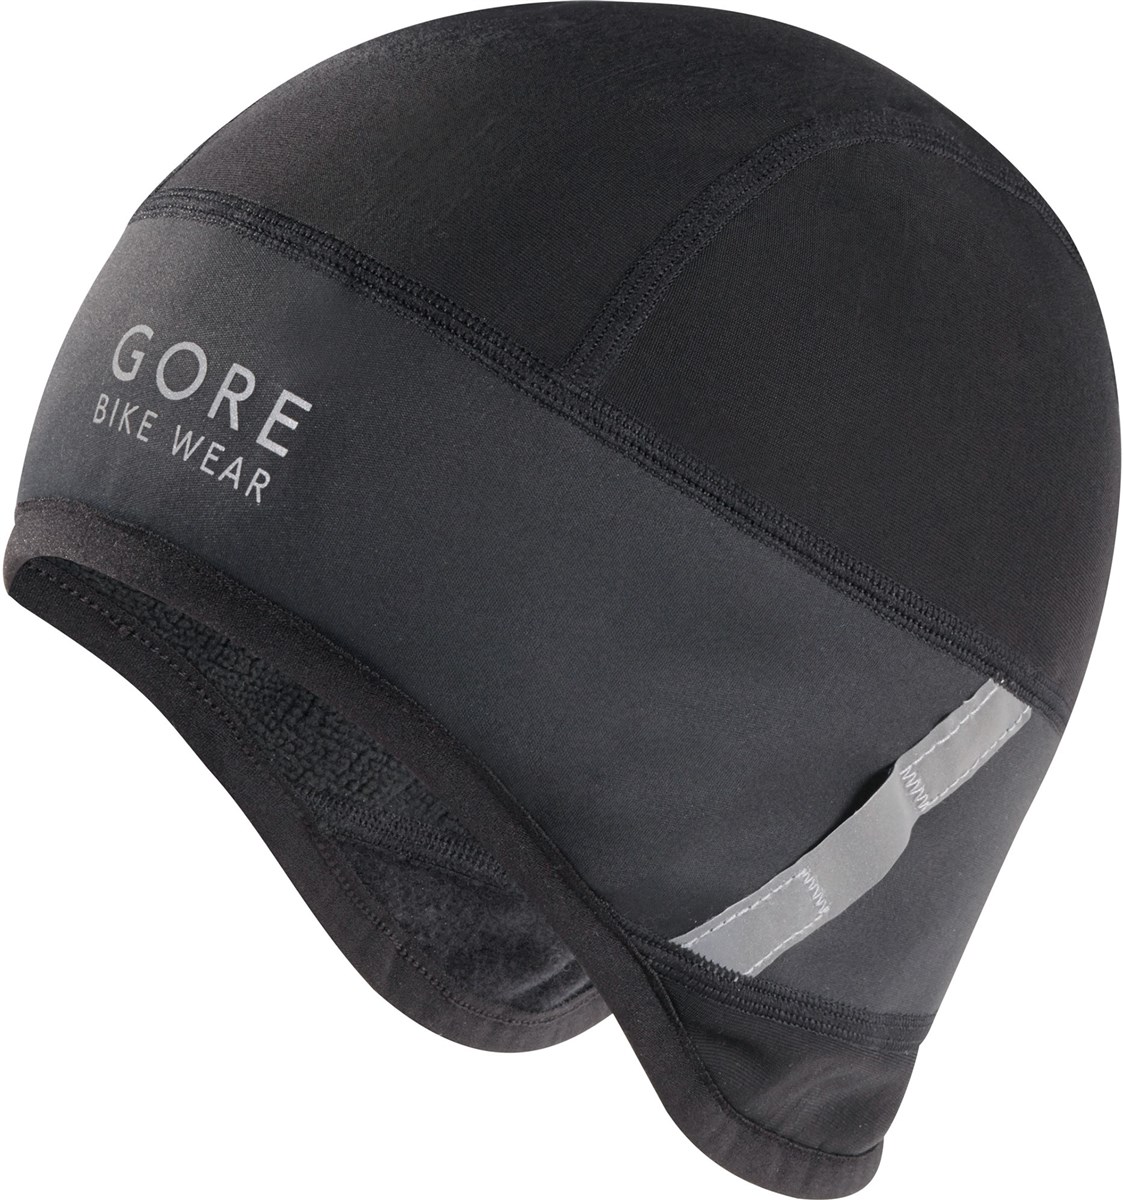 Gore Universal Windstopper Cap AW17 product image